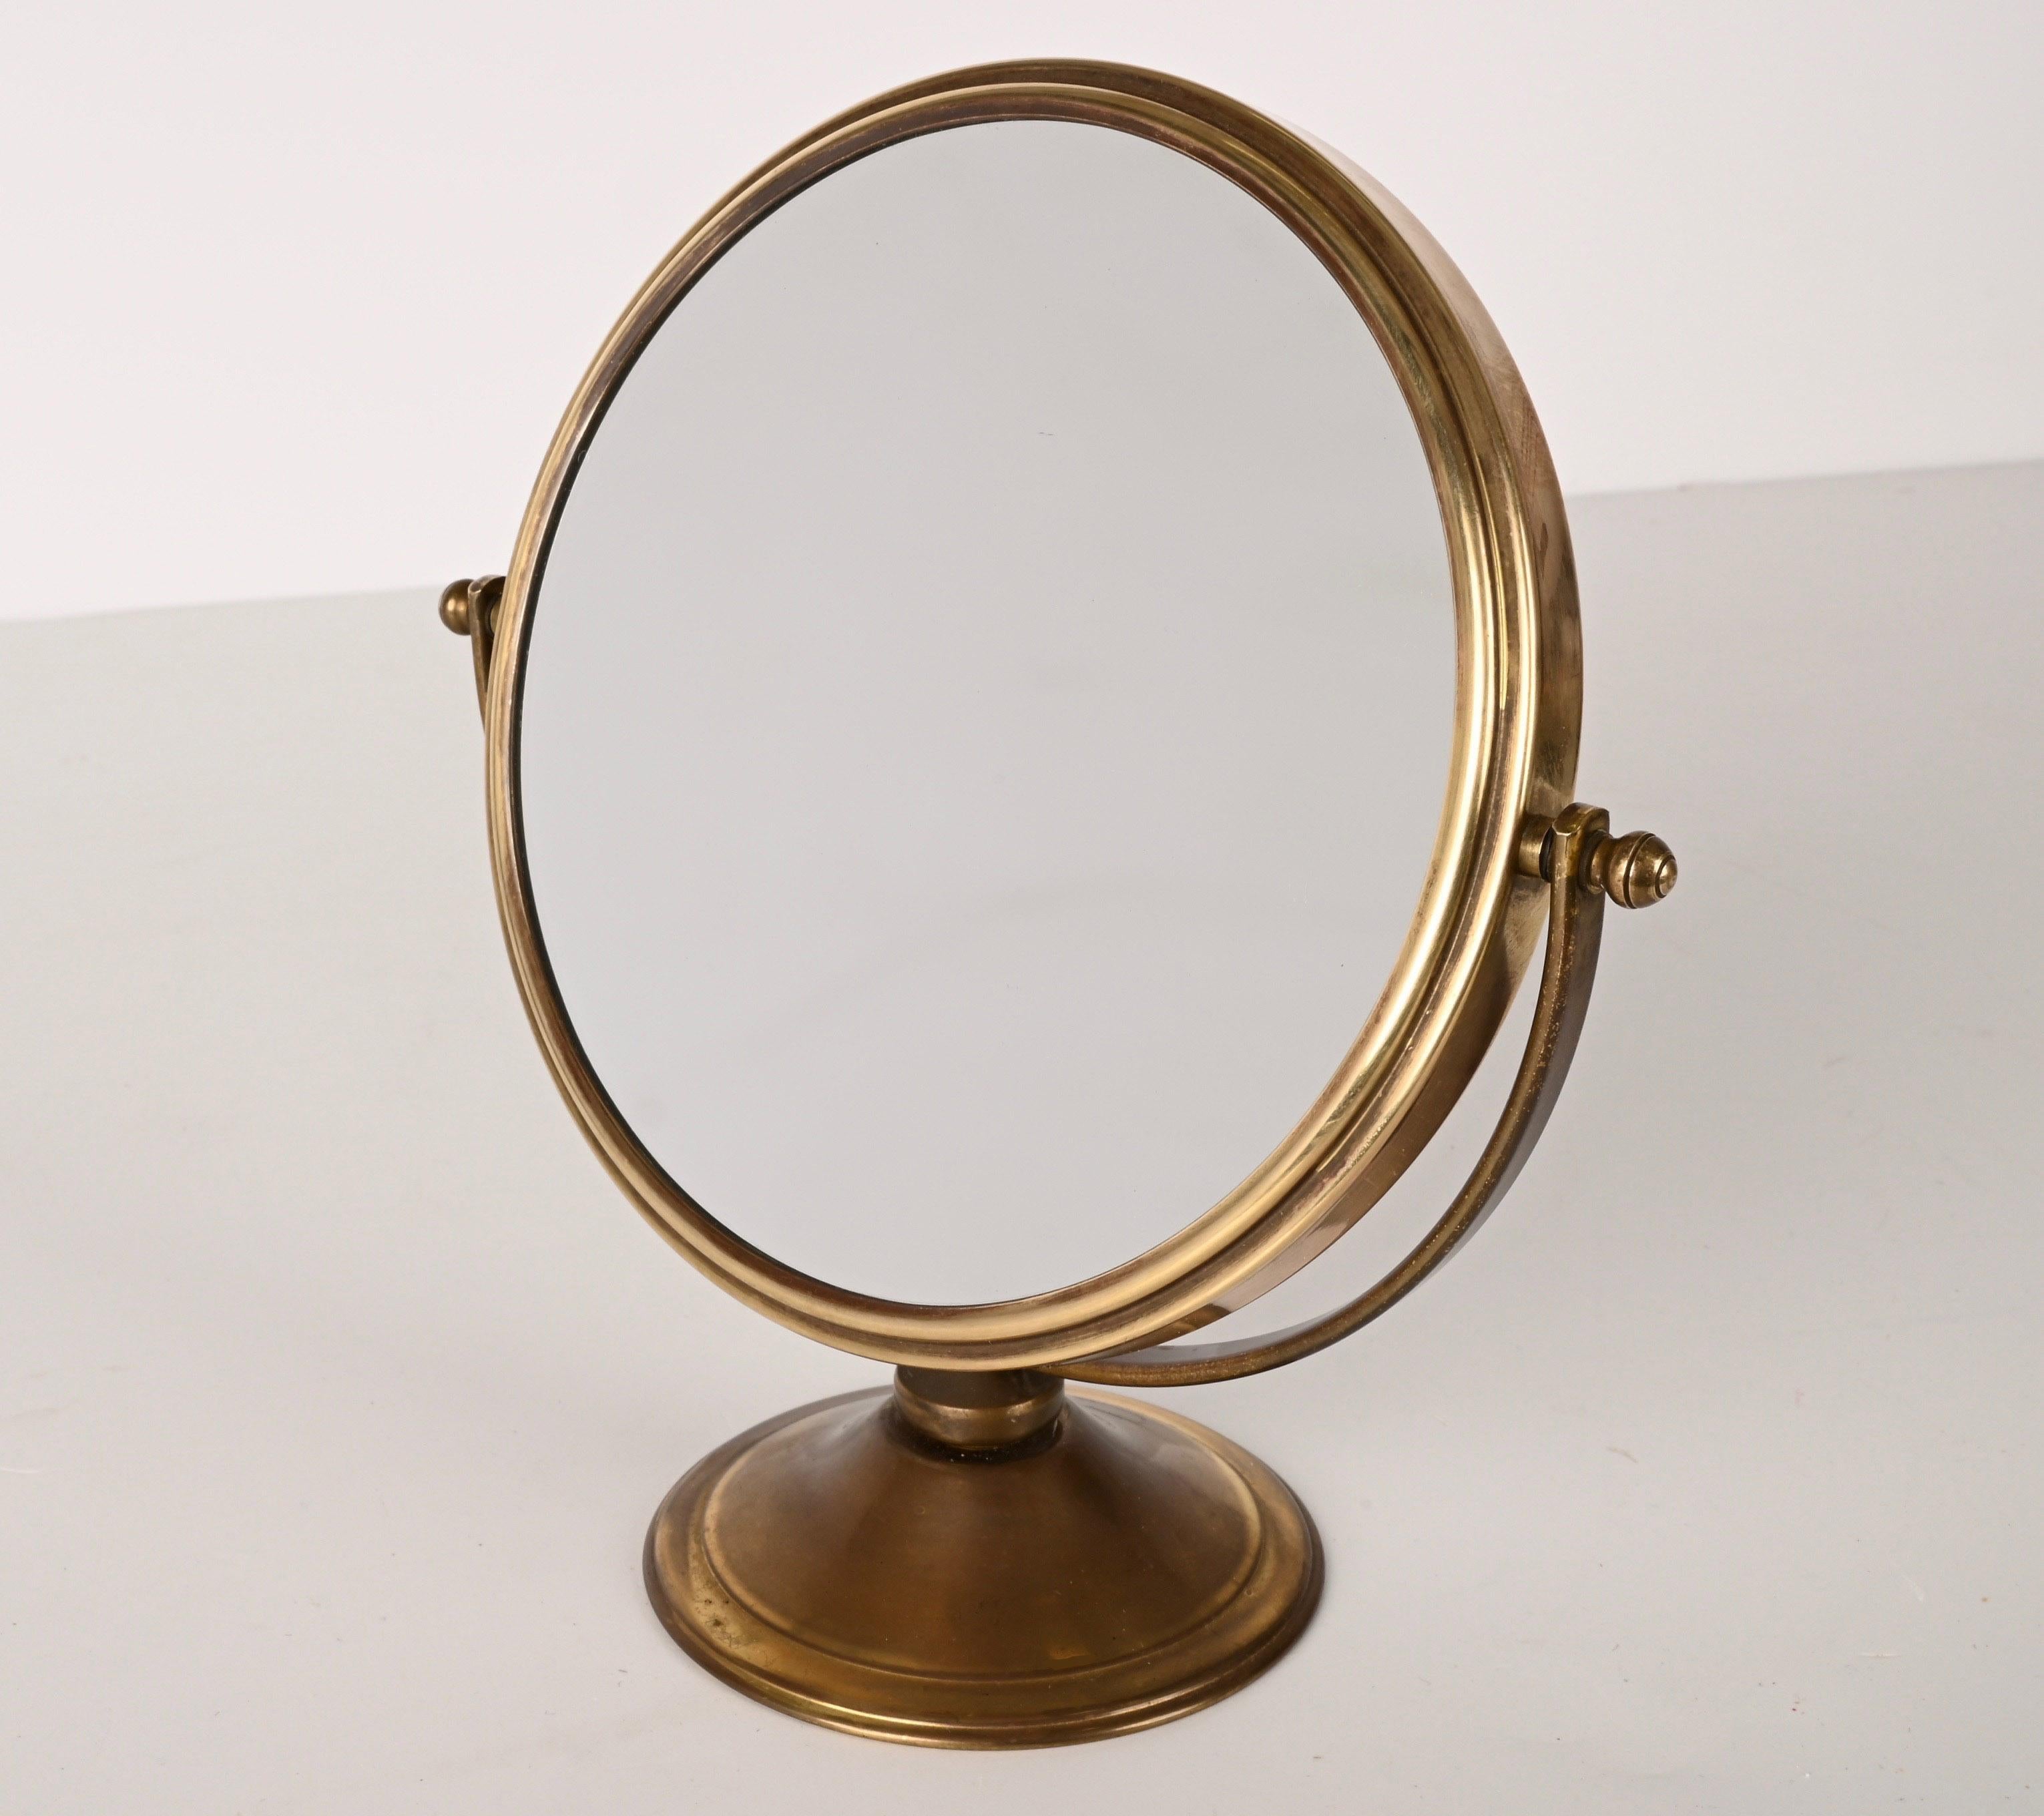 20th Century Double-Sided Adjustable and Magnified Brass Vanity Italian Table Mirror, 1970s